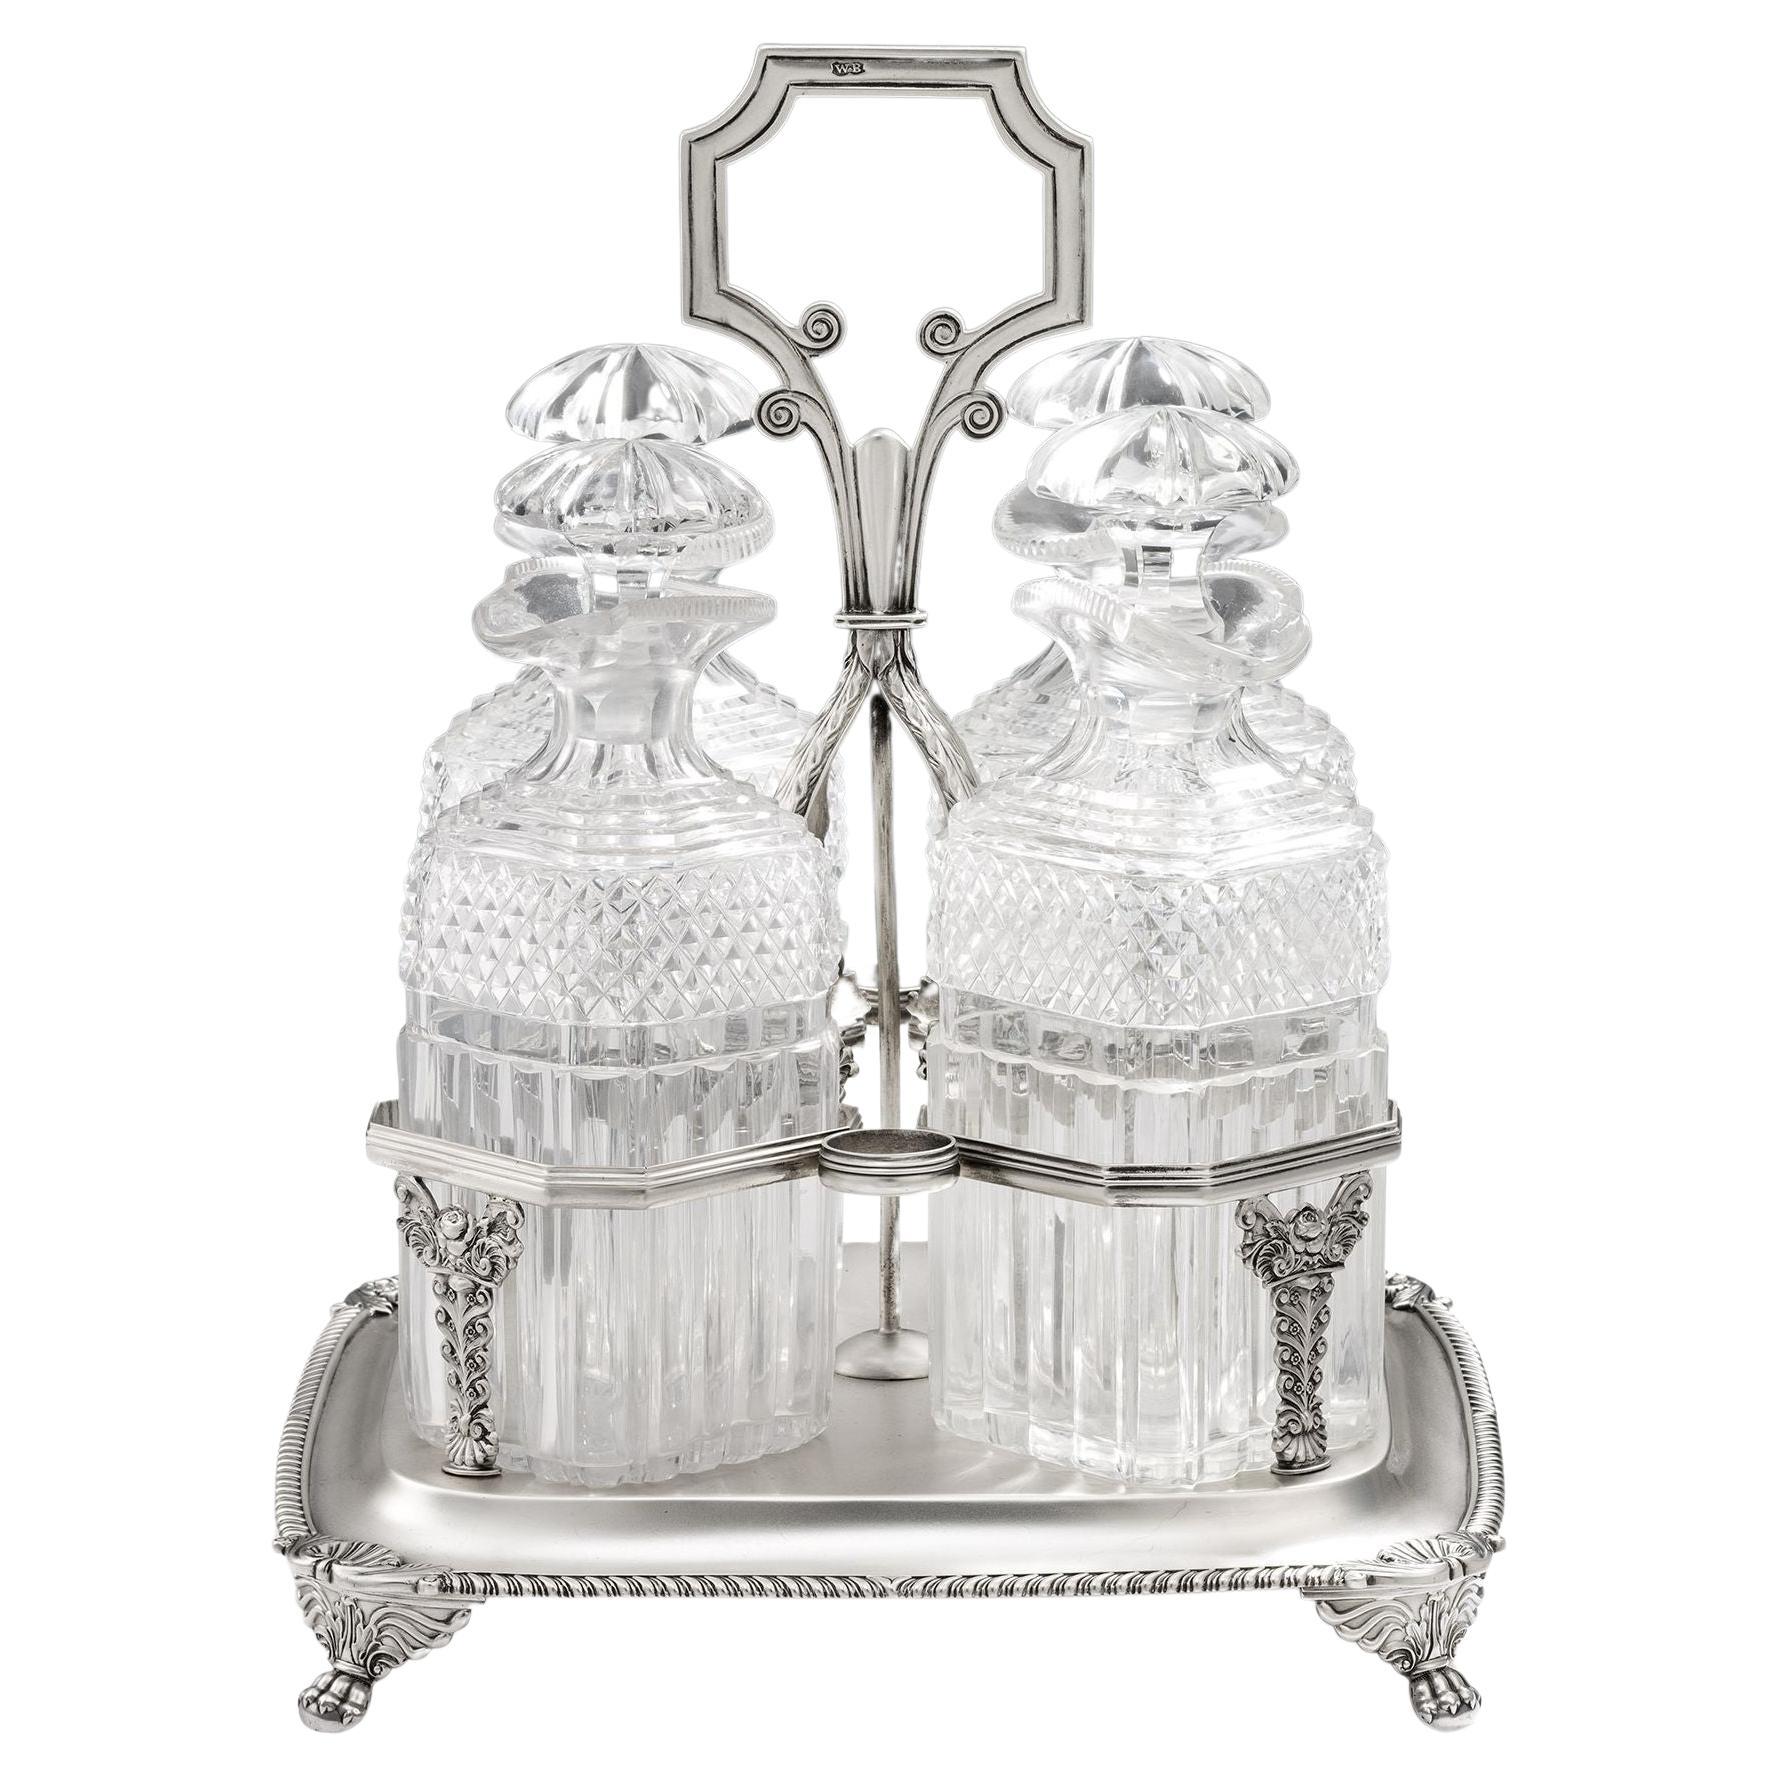 George iv Four Bottle Decanter Stand, London, 1823 by William Bateman